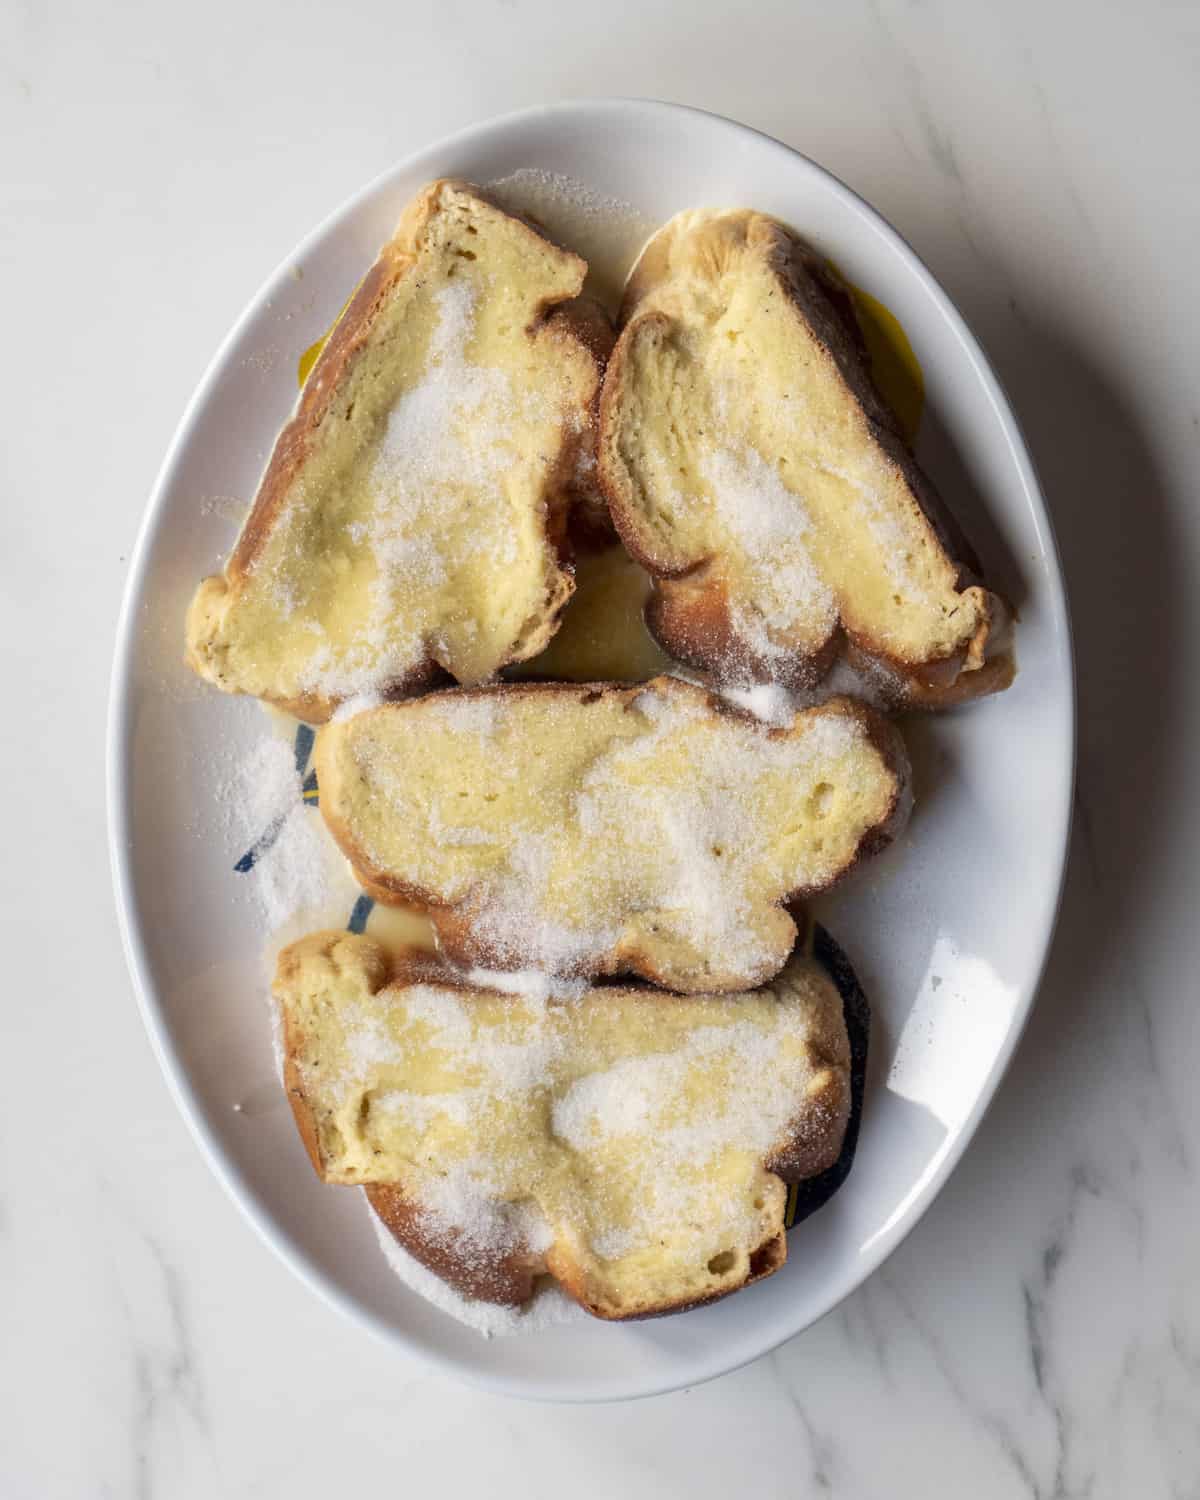 A plate with slices of bread that have been soaked into french toast batter and taken out of the excess batter.